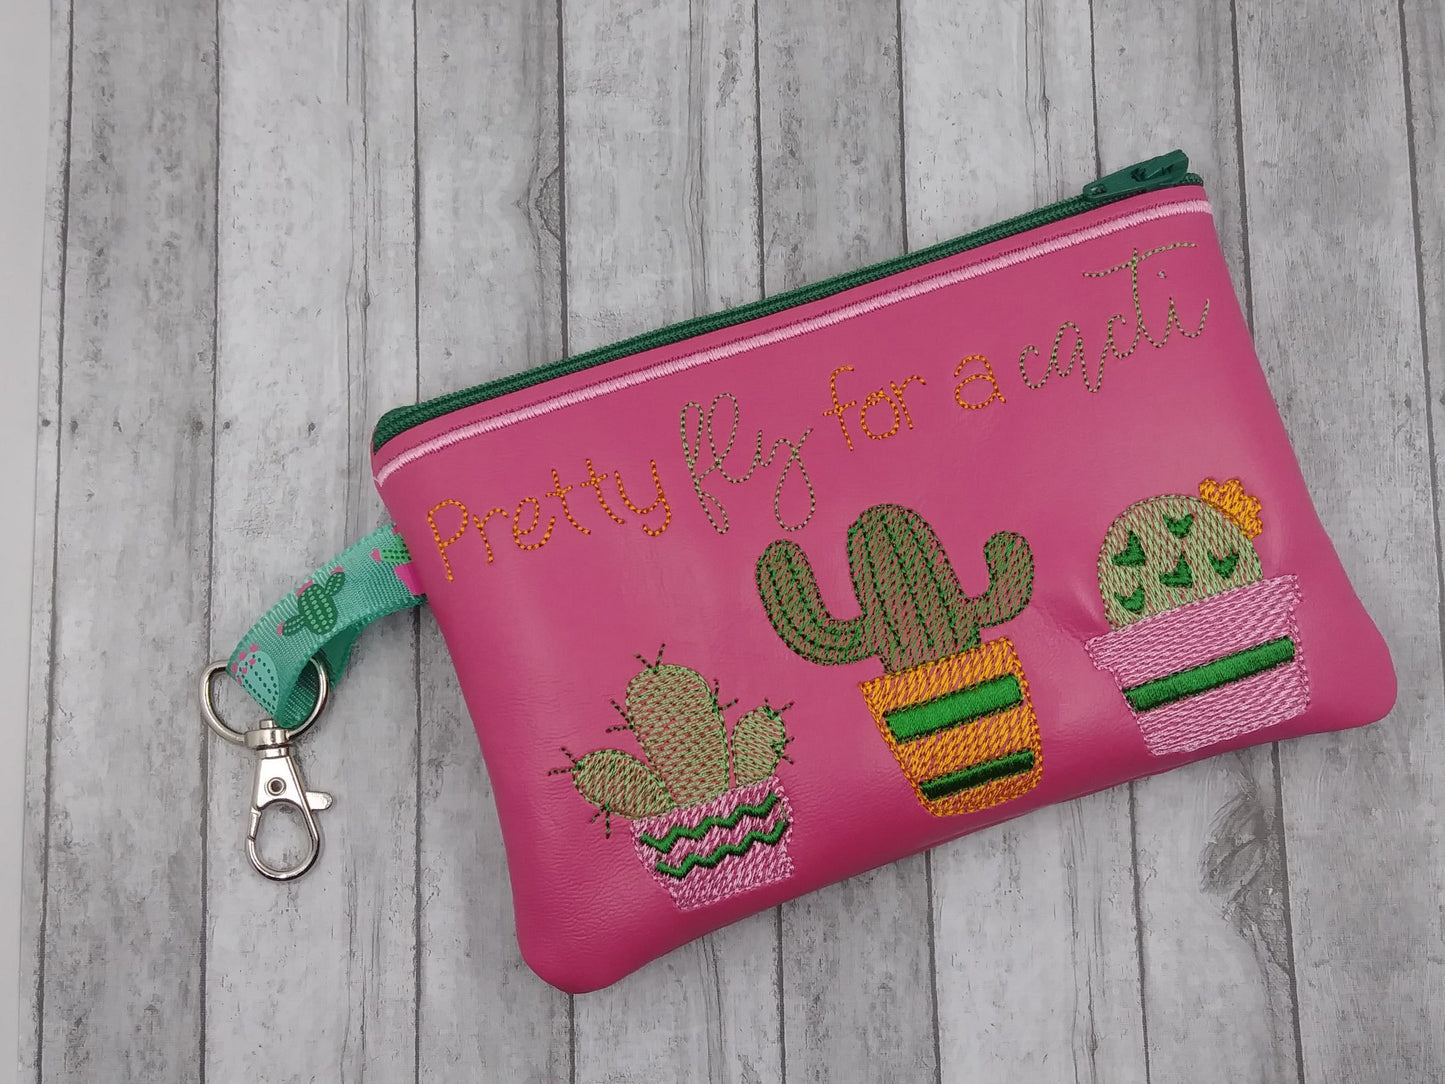 Pretty Fly For a Cacti Zipper Bag - 2 sizes - Digital Embroidery Design